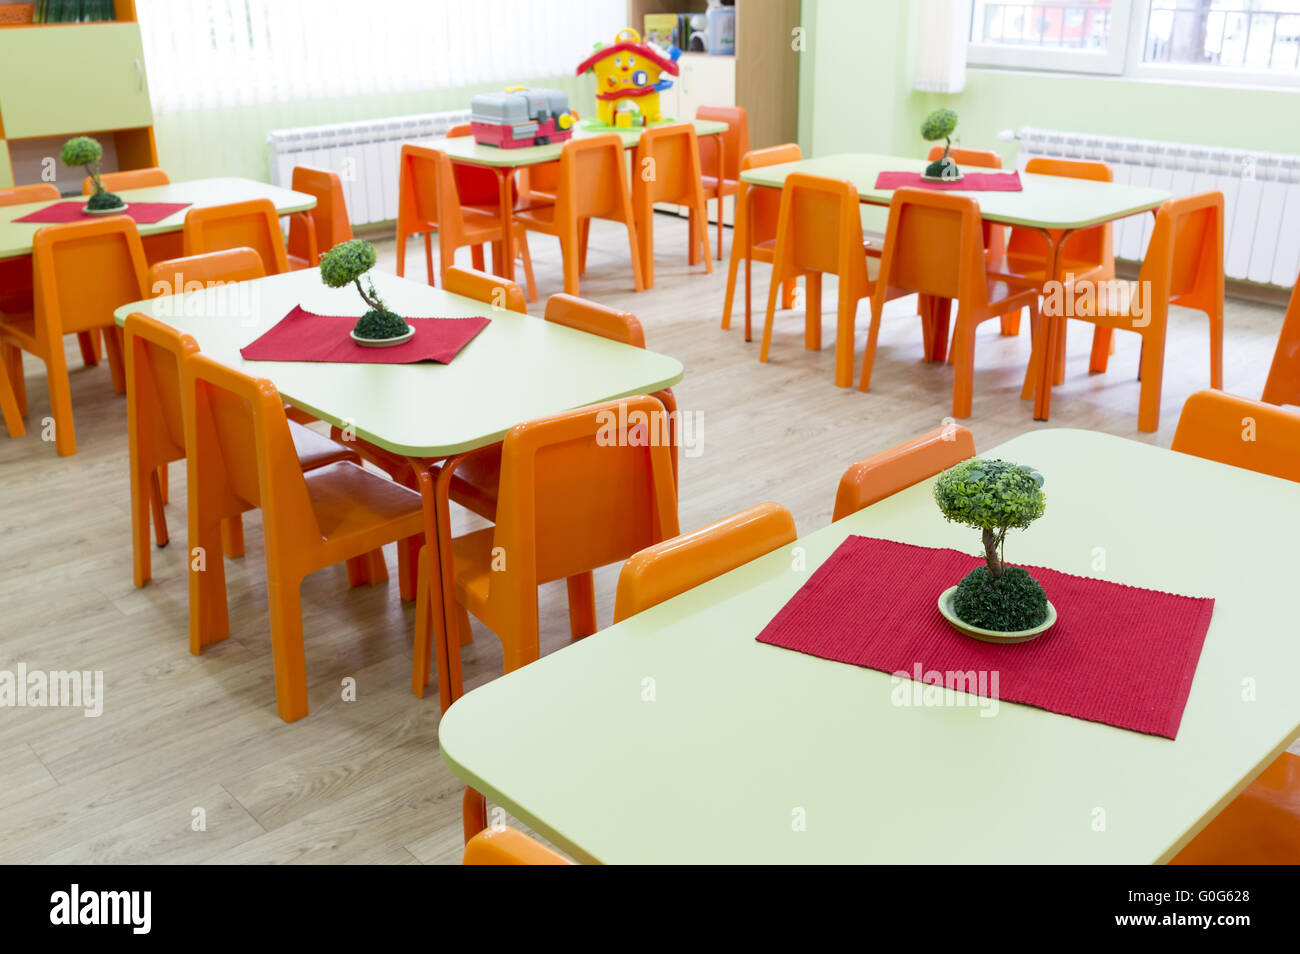 Kindergarten Classroom With Small Chairs And Tables Stock Photo